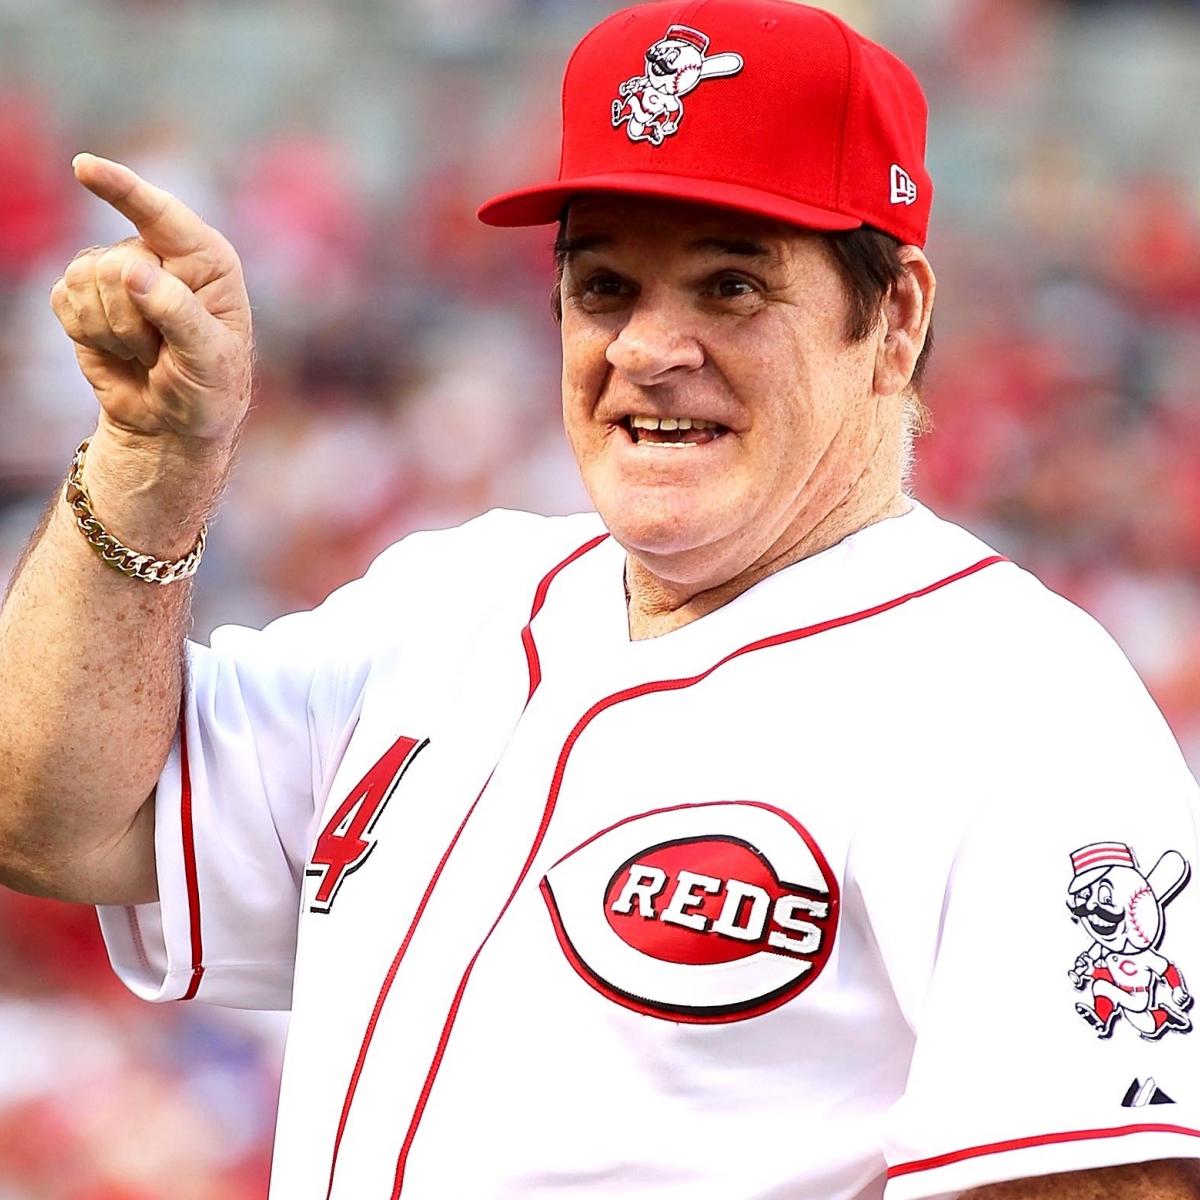 Pete Rose bet on games as a player, report says – Orange County